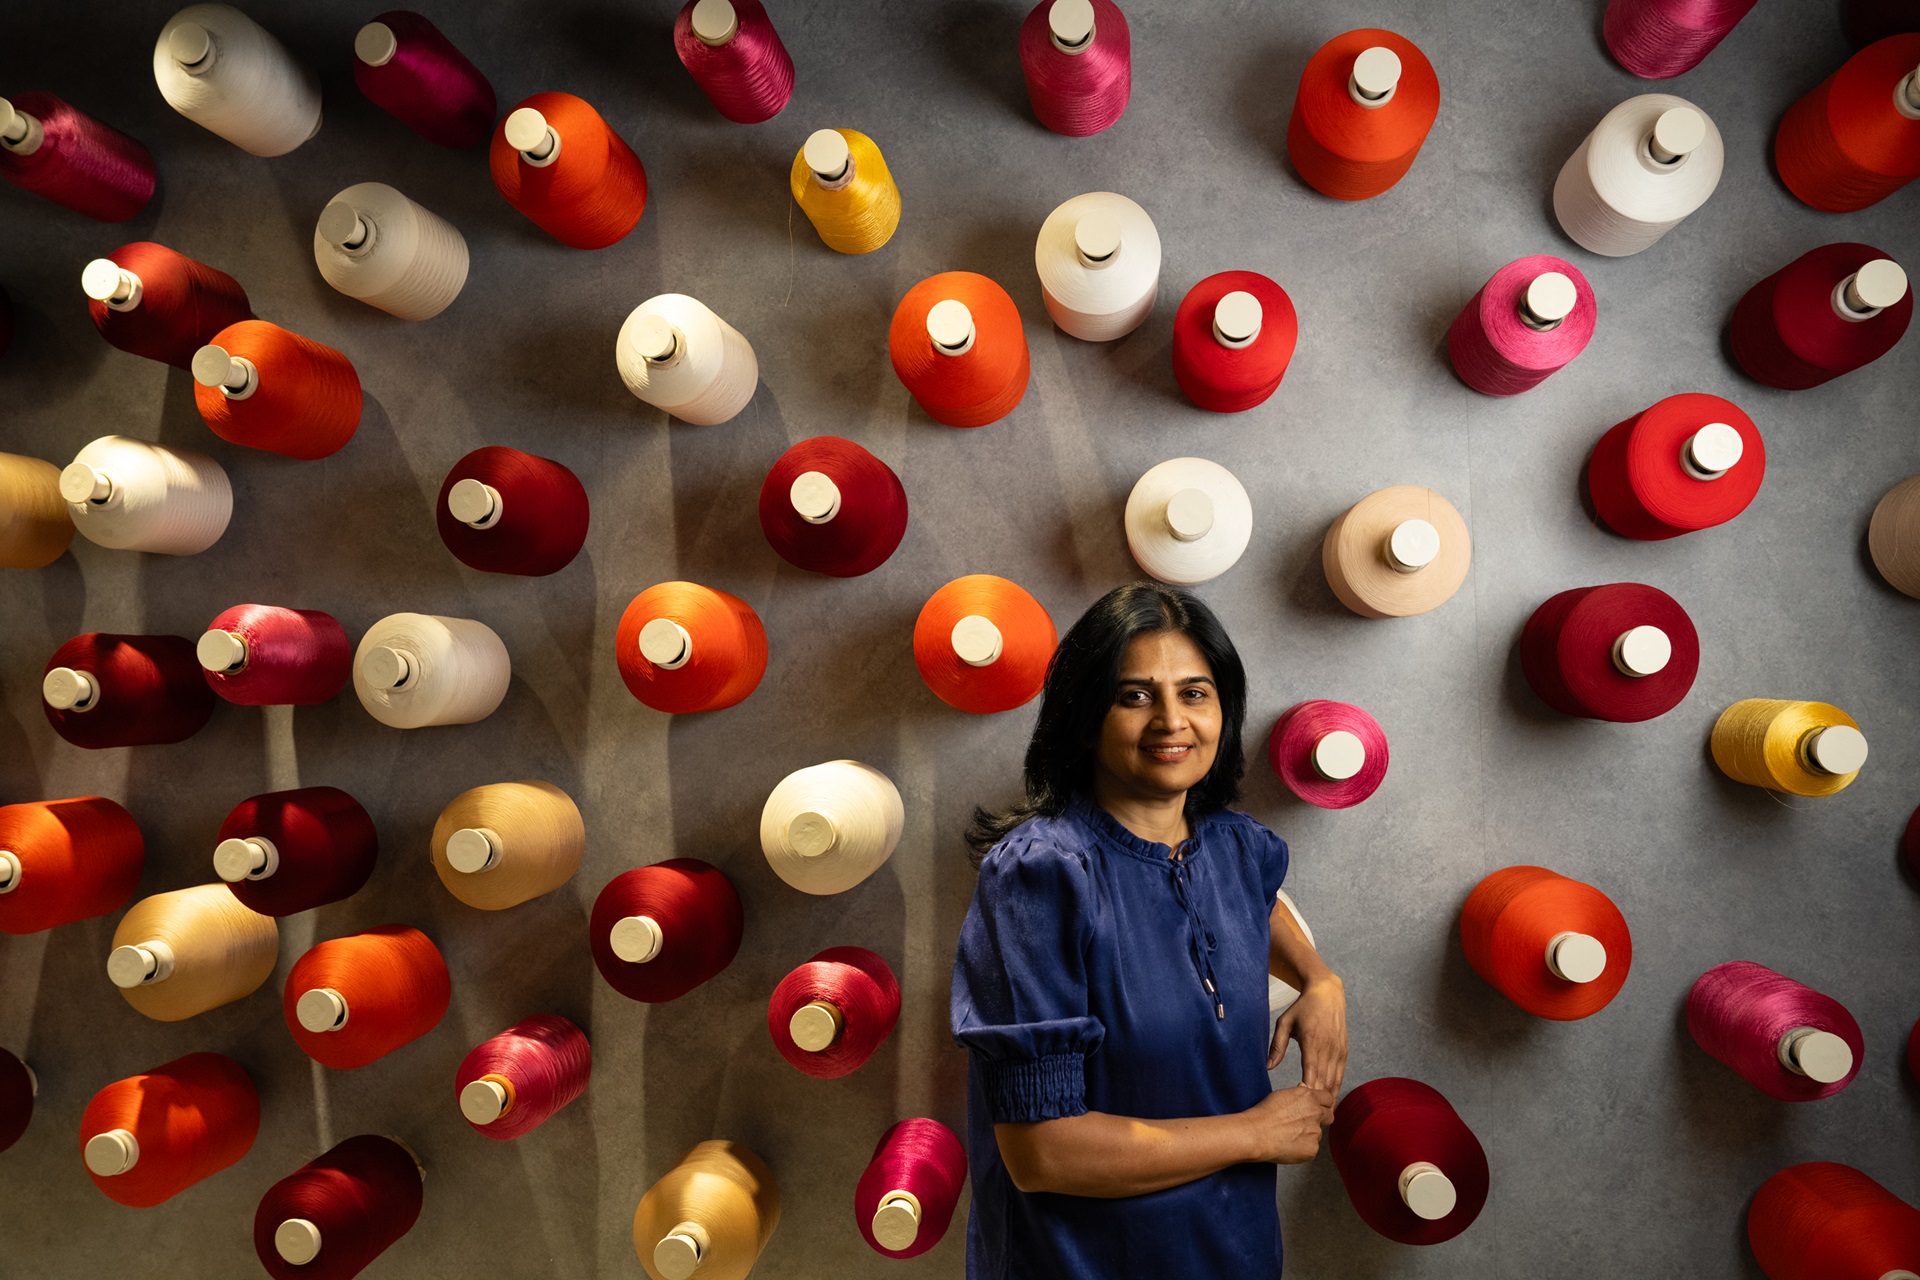 Portrait photo of a woman standing in front of a wall of oversized colorful spools of thread